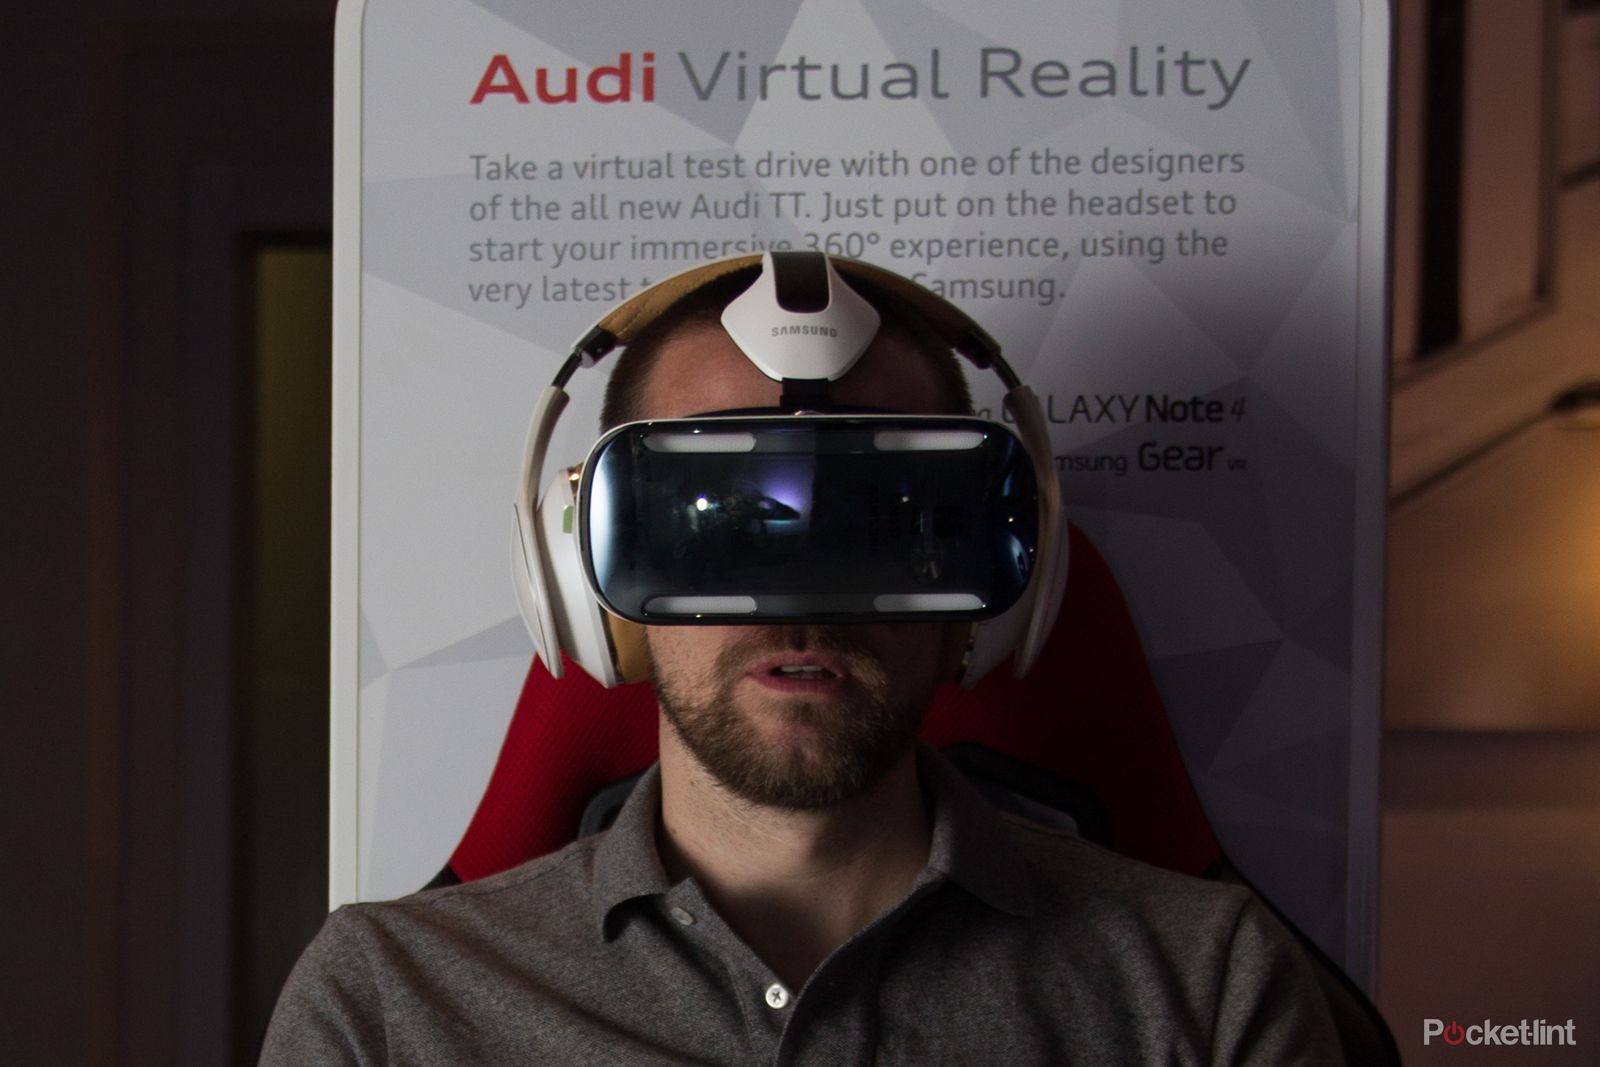 audi deploys samsung gear vr headsets to add virtual reality to audi tt launch image 1